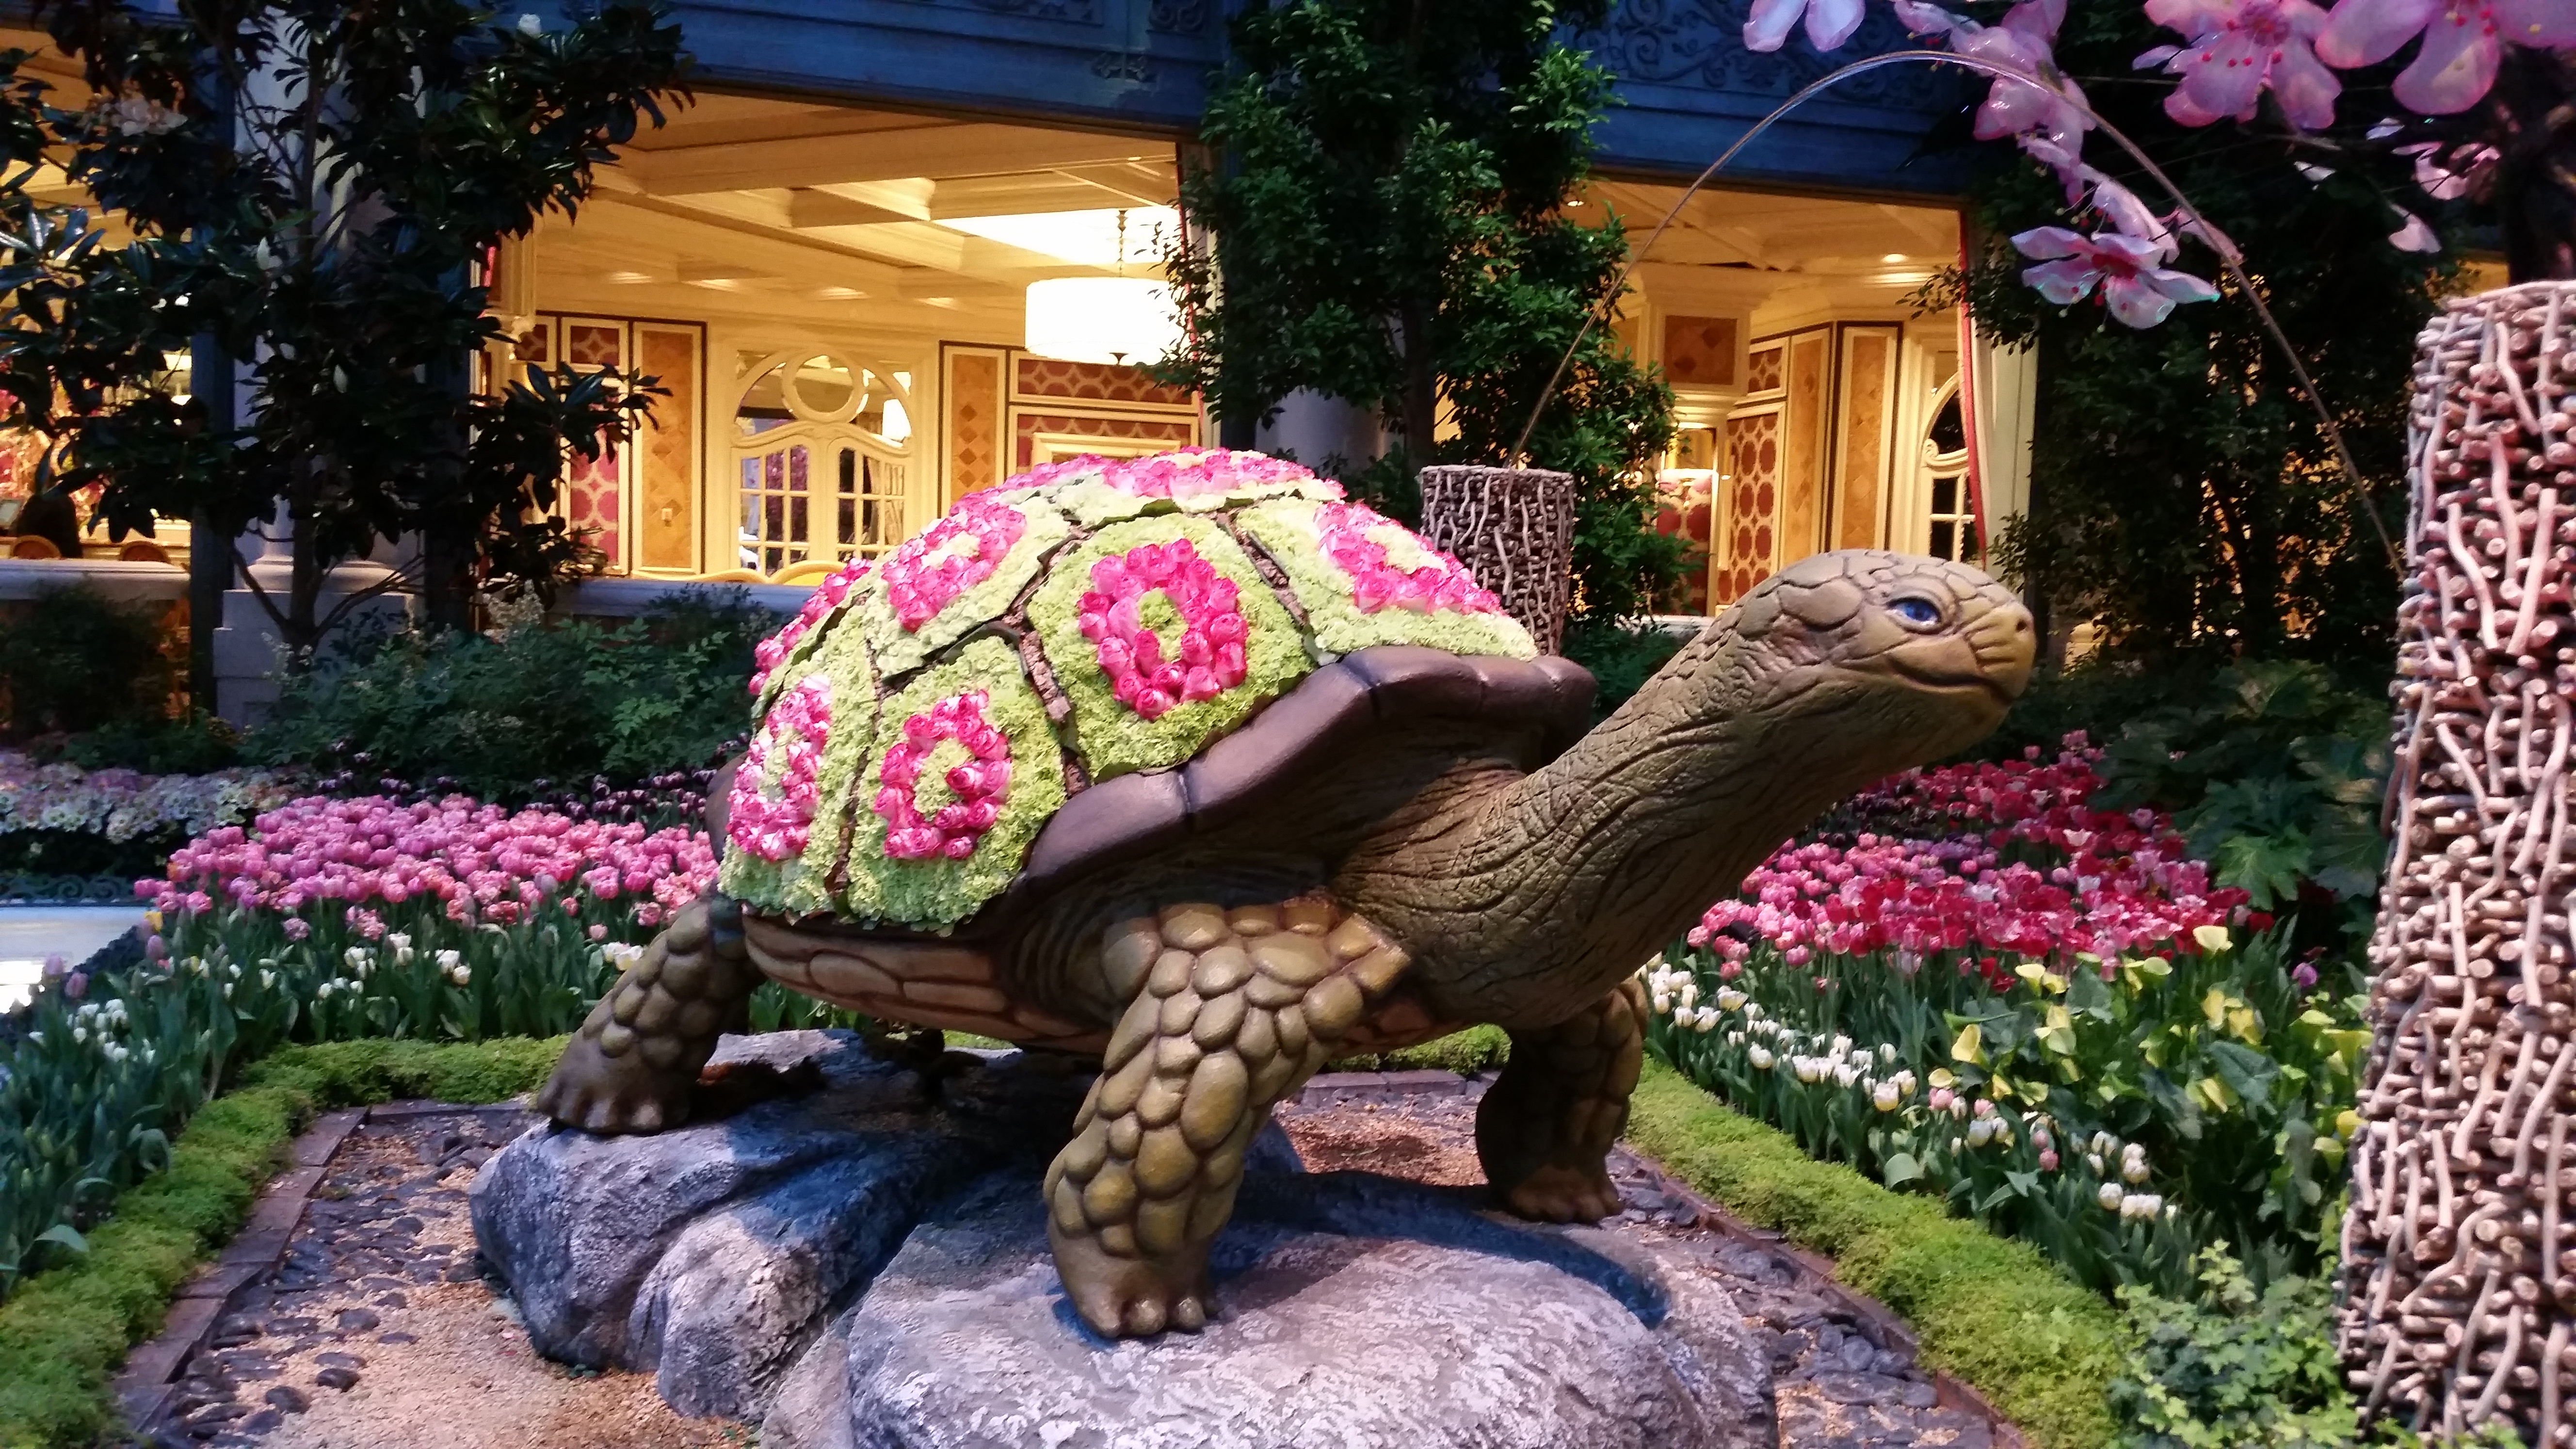 Looking for free things to do in Las Vegas. Be sure to visit the conservatory at the Bellagio Casino.